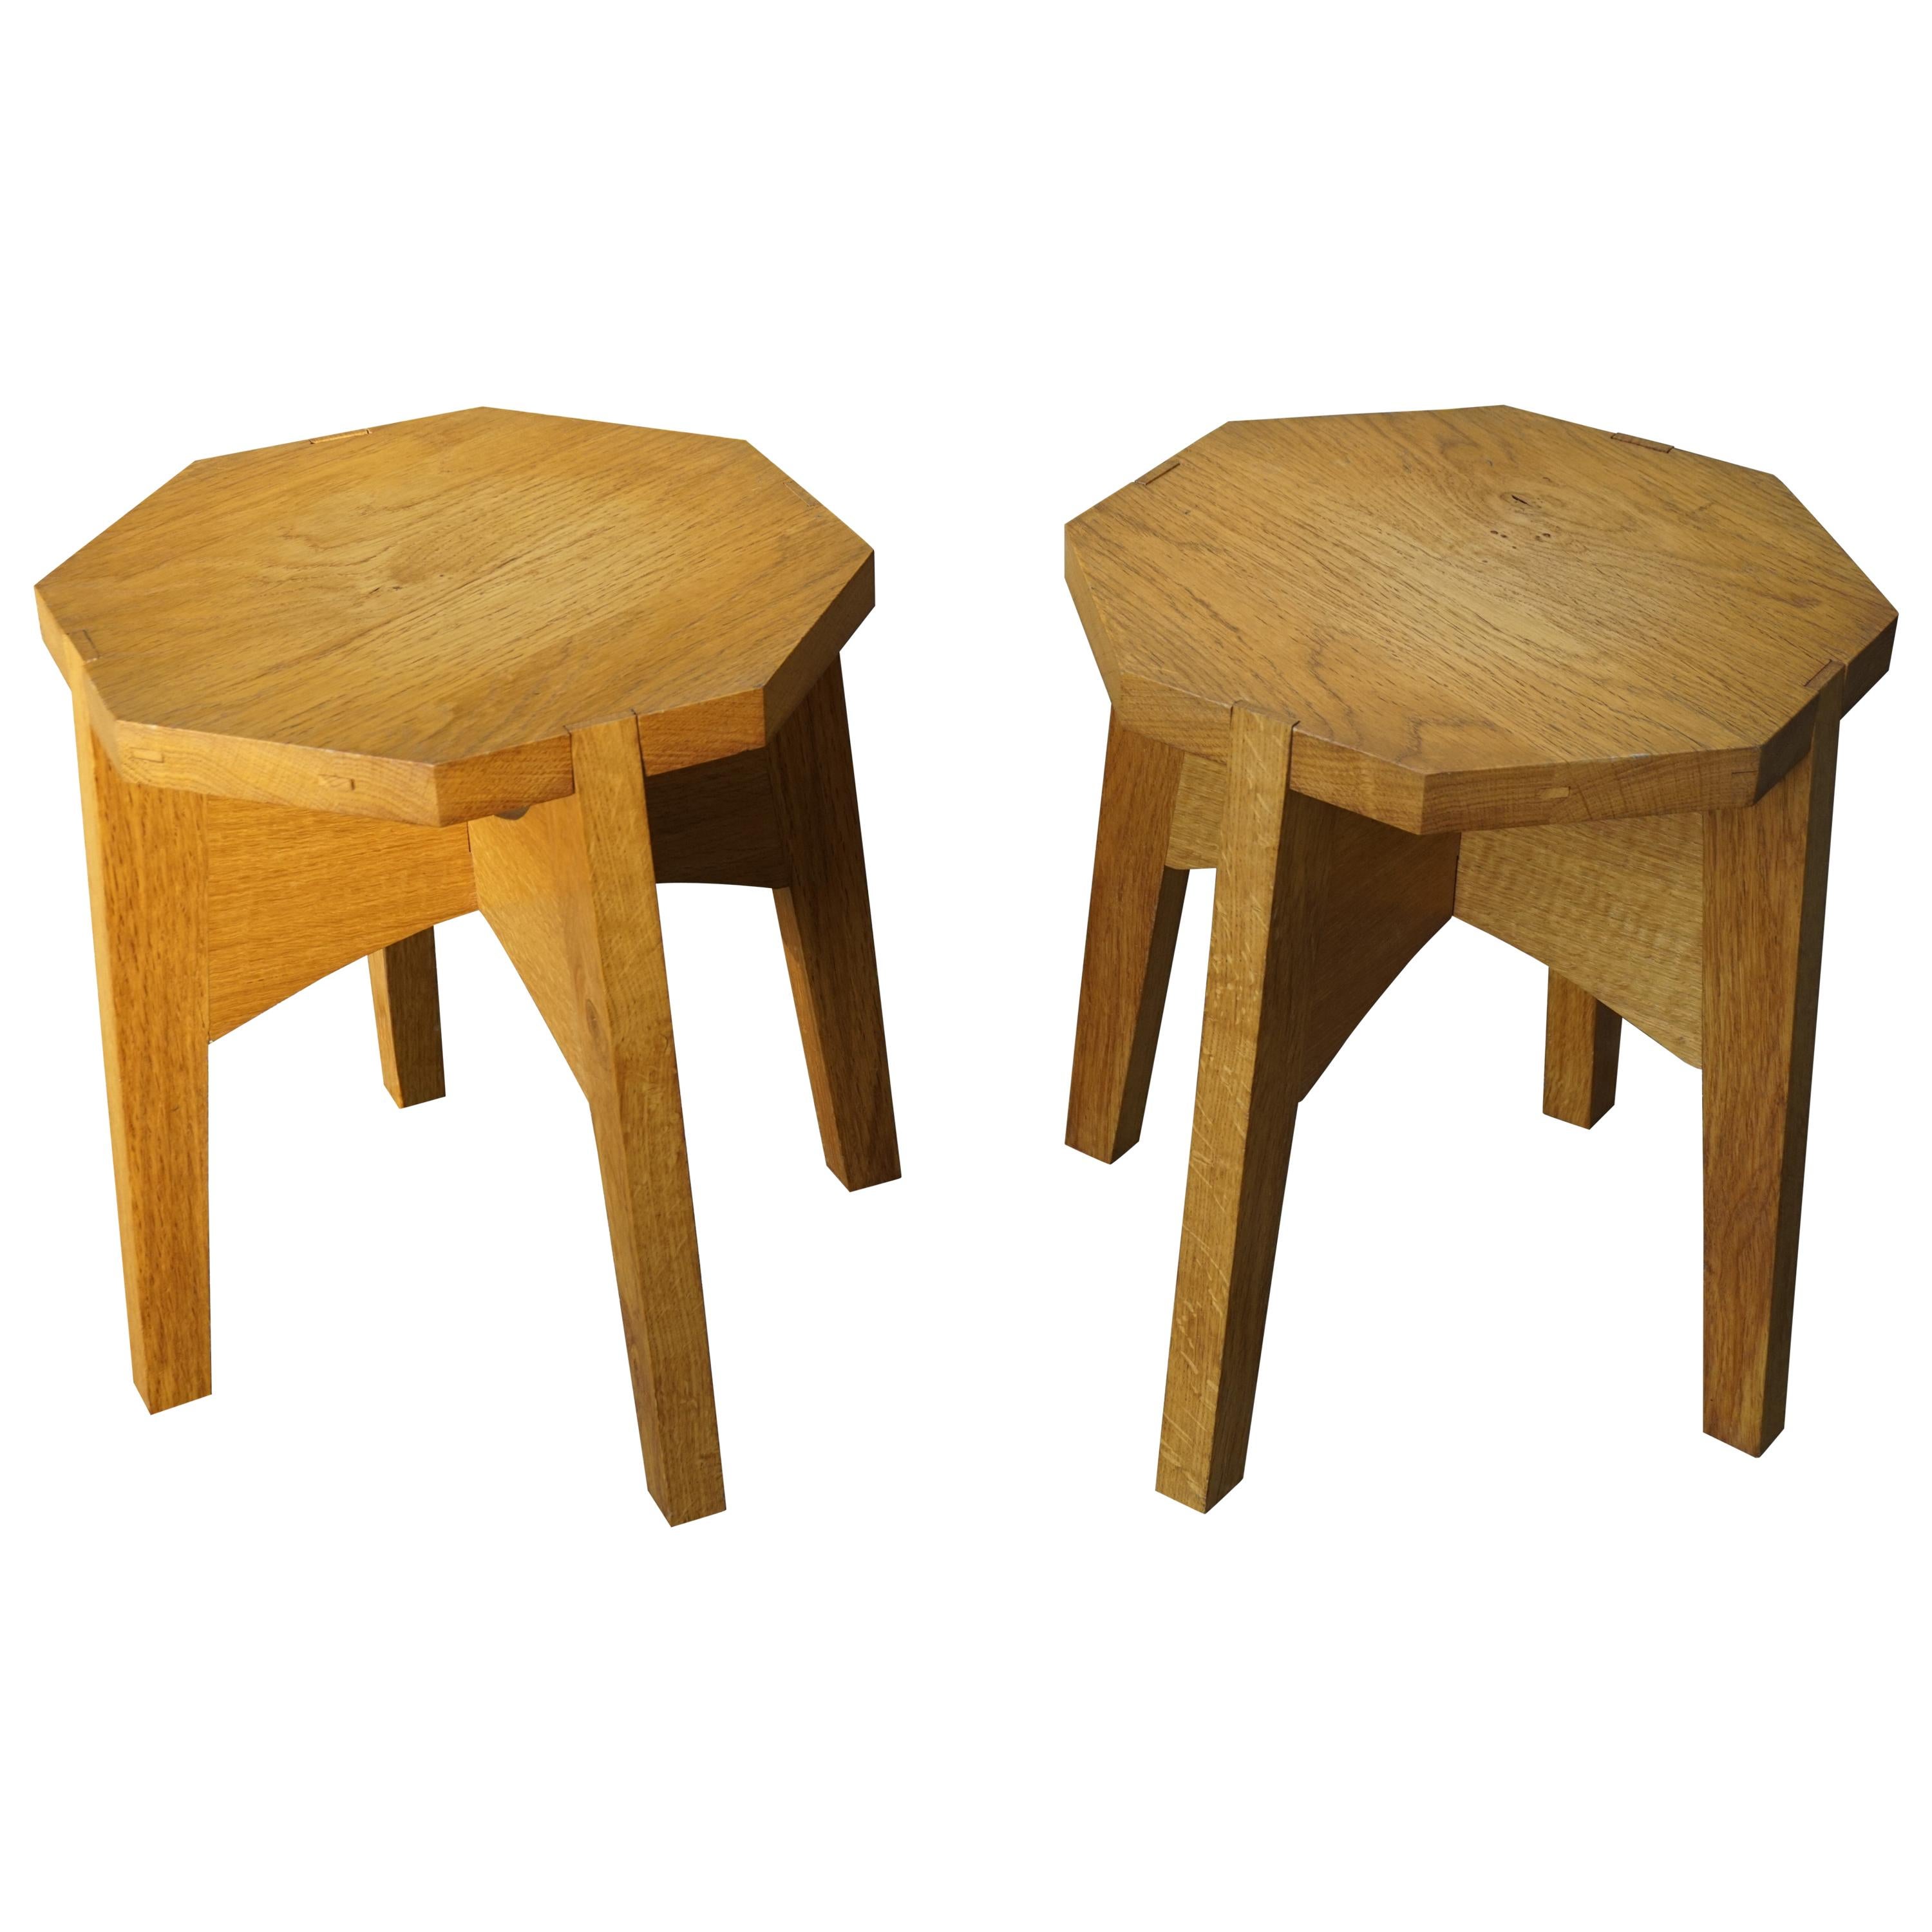 Pair of Midcentury Made, Dismantable Solid Oak End Tables of Excellent Condition For Sale